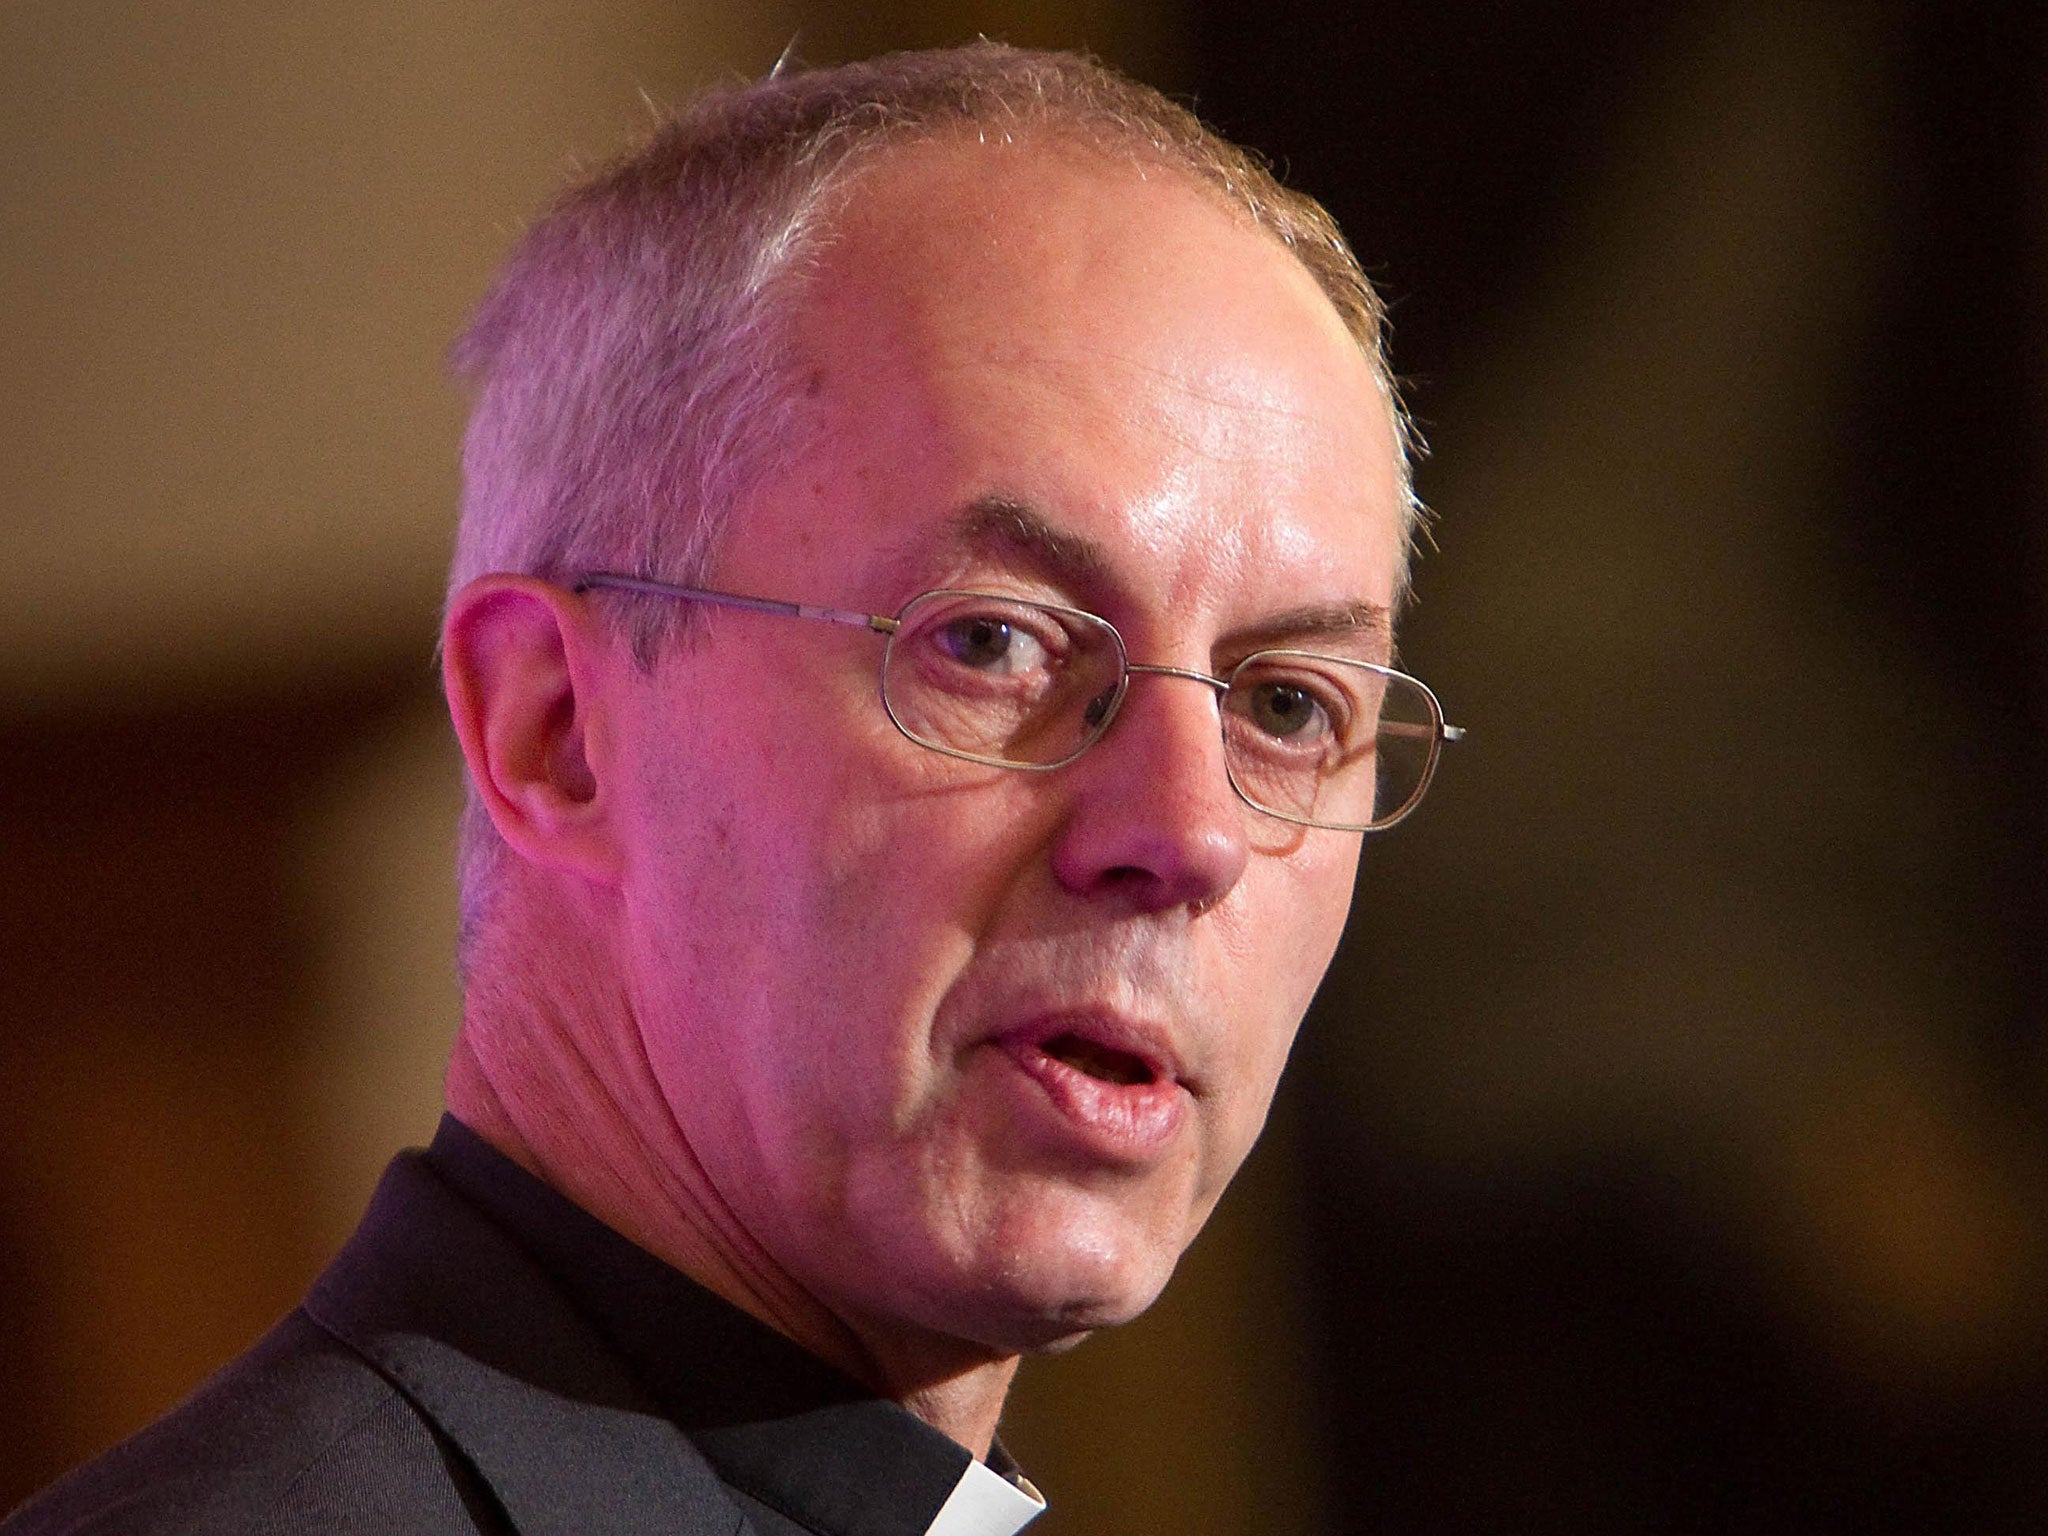 The Most Rev Justin Welby has been urged to hand over most of the 25 Bishops’ seats to other groups